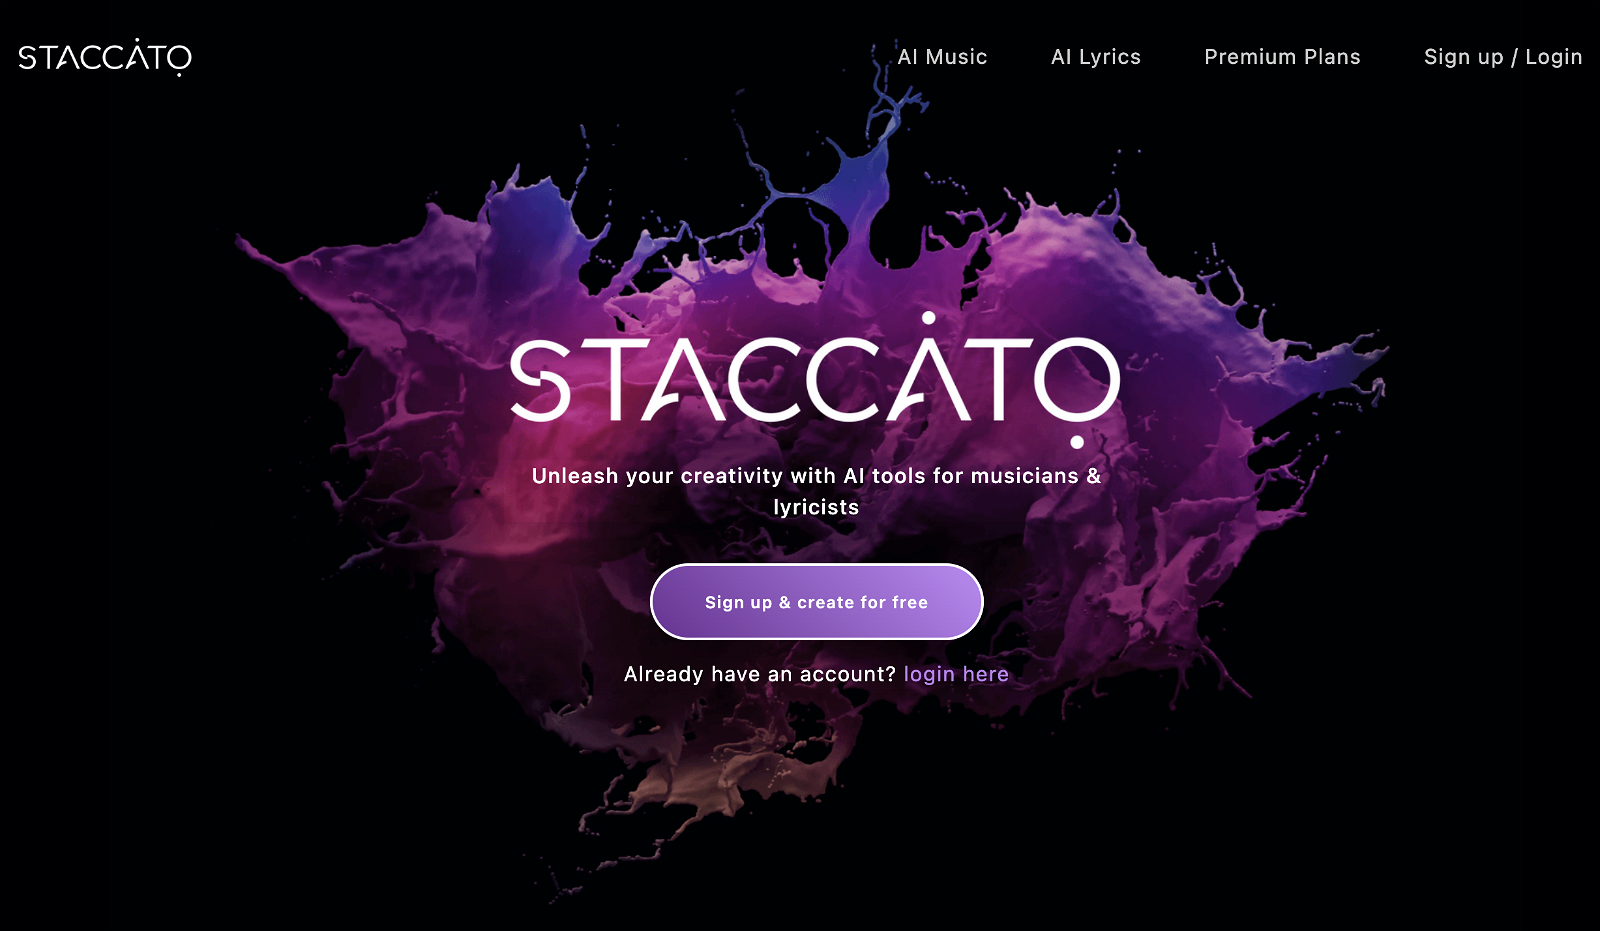 Staccato website